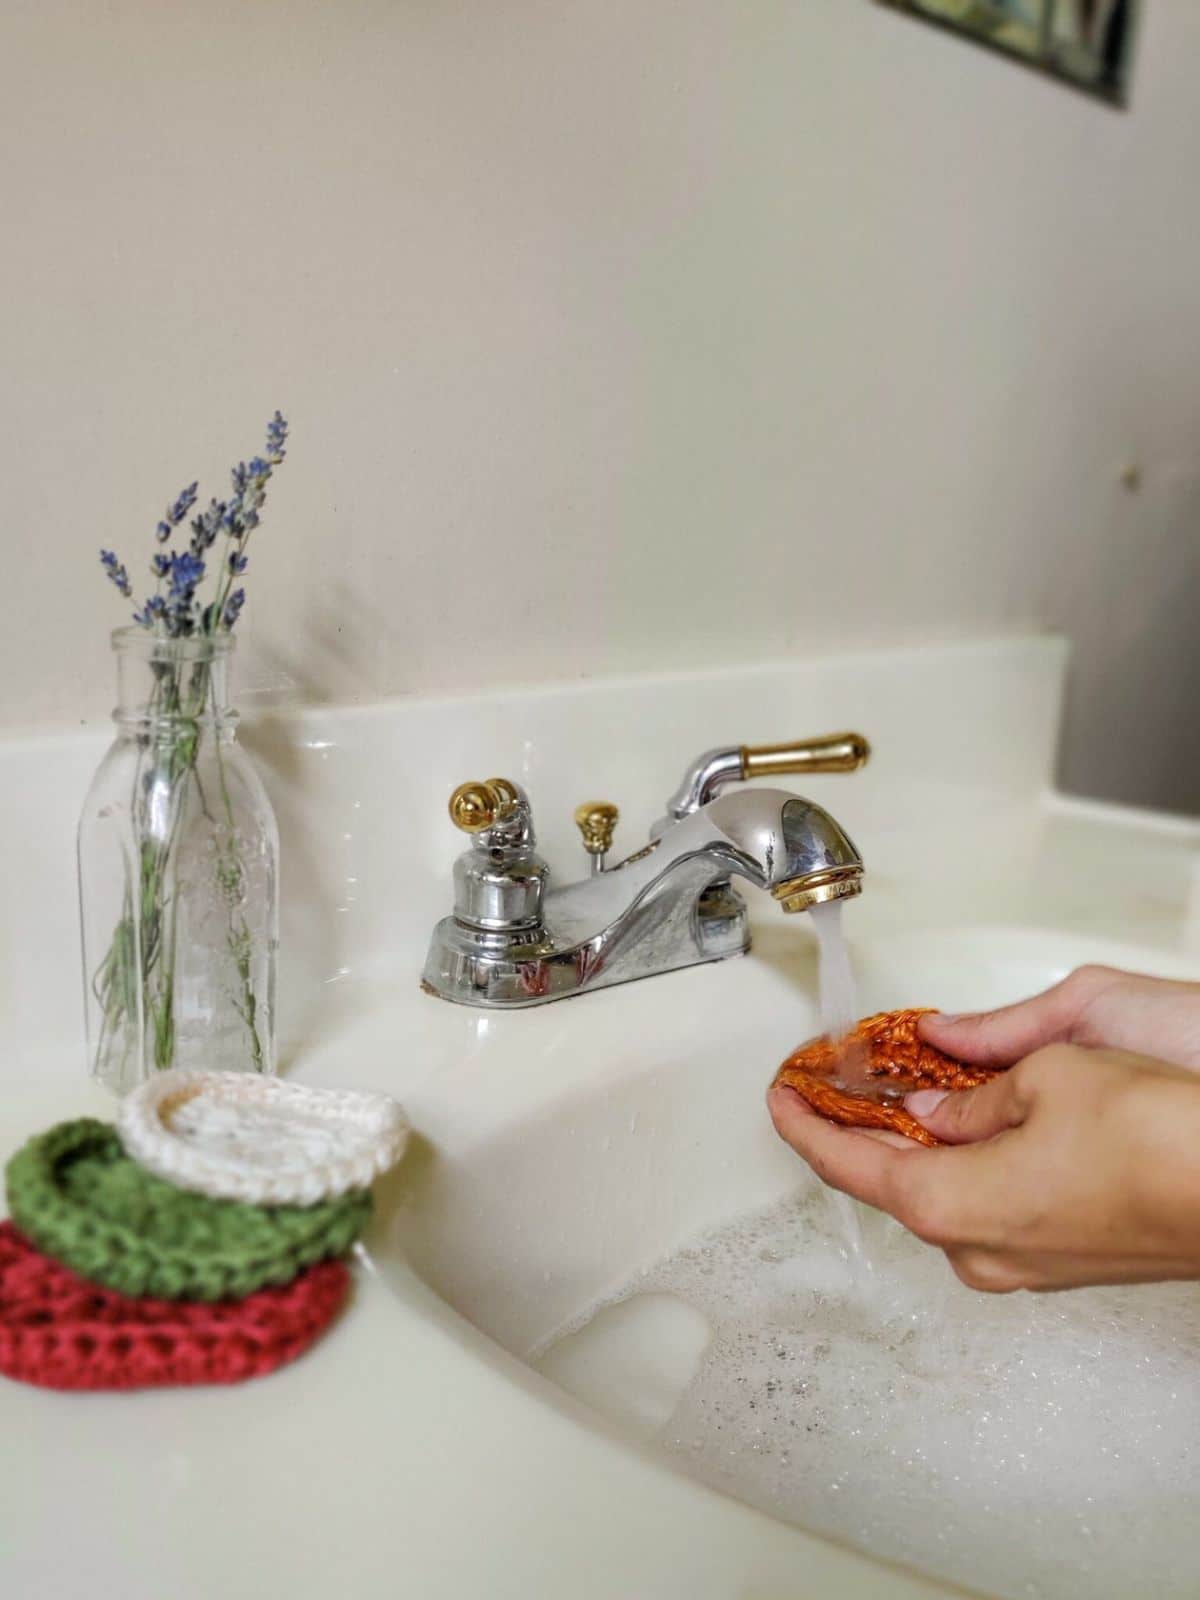 A pair of hands holding a pink crochet scrubbie under a running tap over a sink with a small pile of scrubbies next to it.